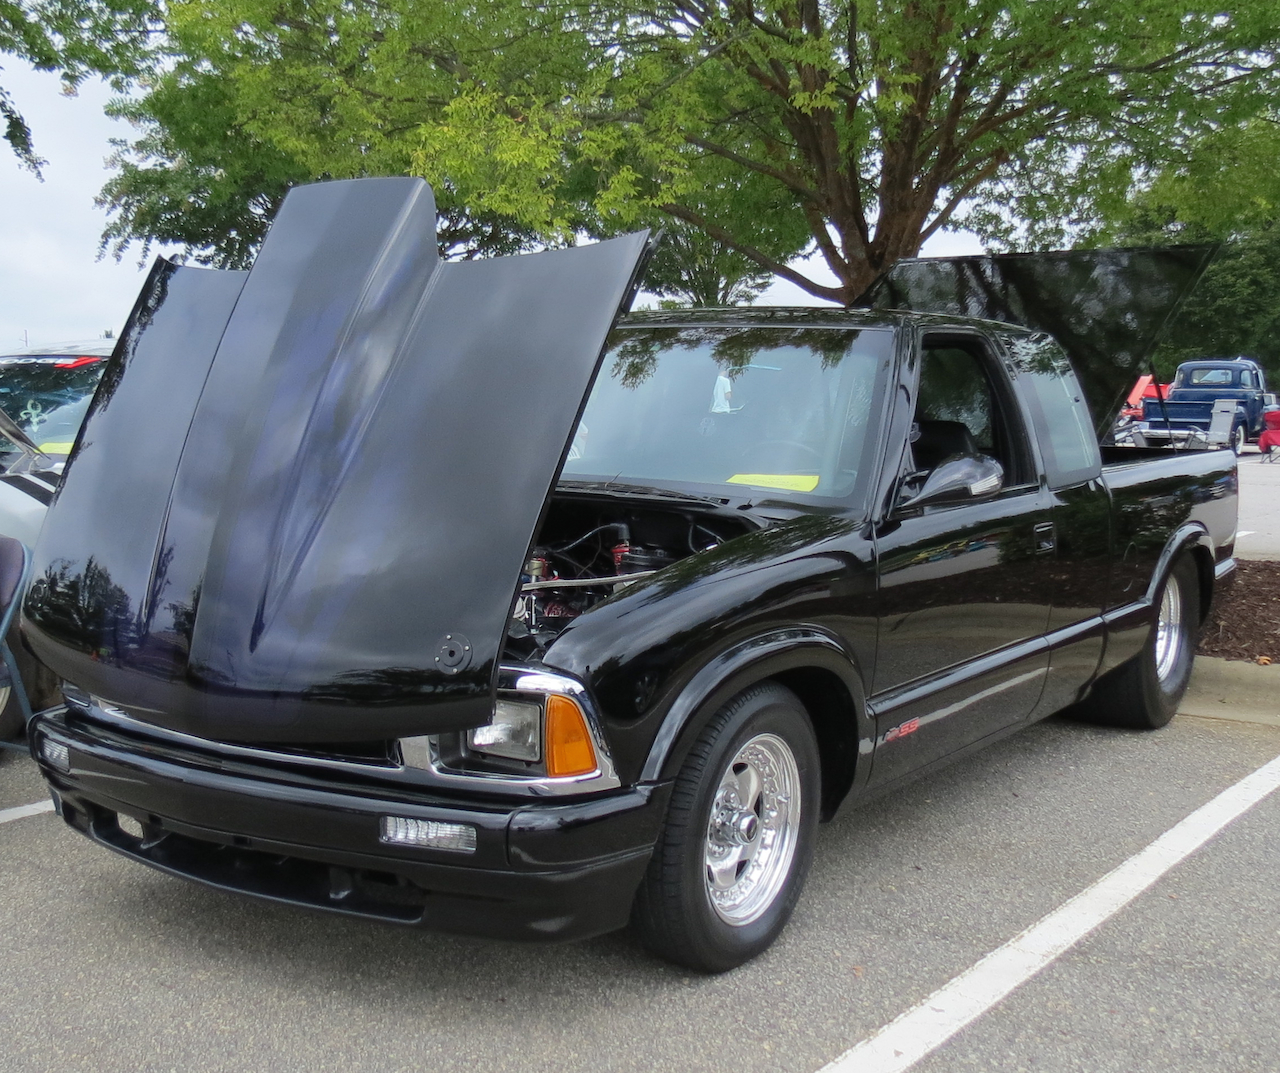 1994 Chevrolet S10 customized pickup truck. Capital City Cruisers